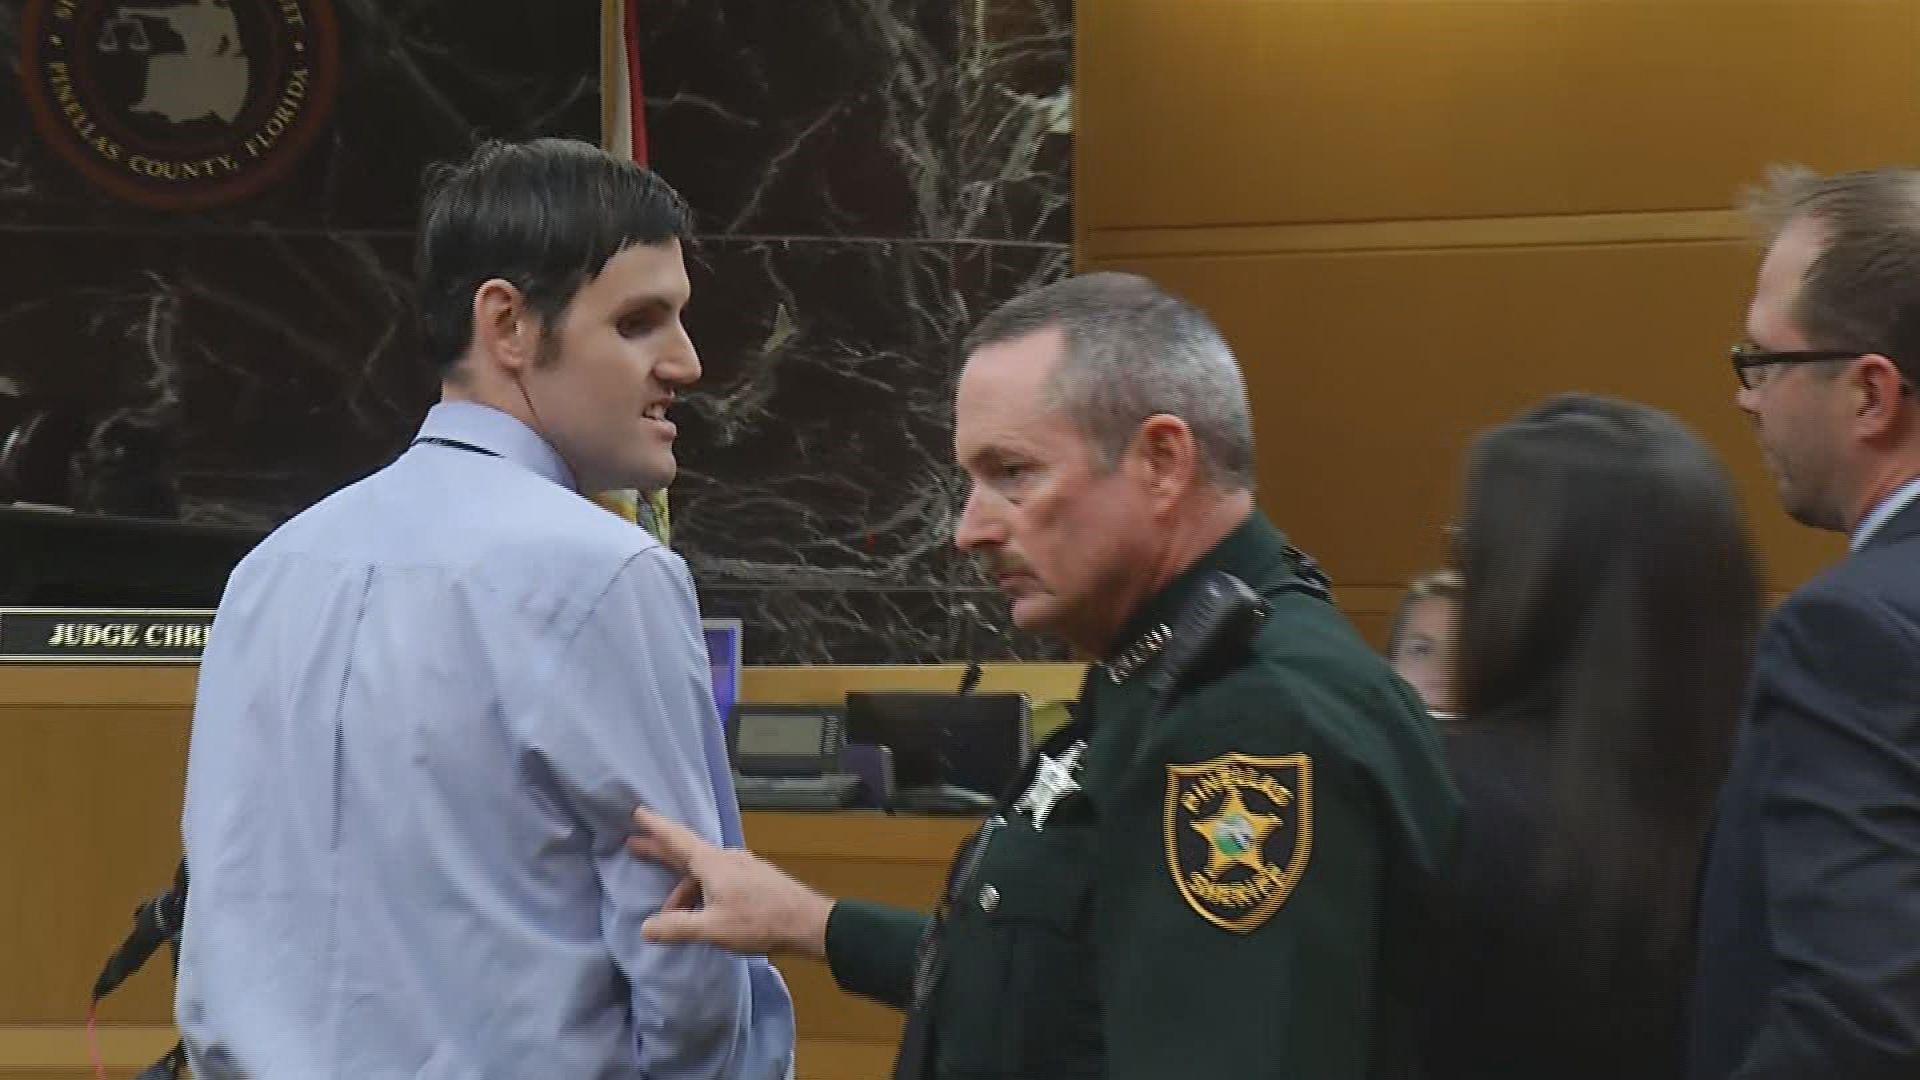 Four years after 5-year-old Phoebe's death, a jury has reached a verdict in her father's murder trial. A jury on Tuesday convicted John Jonchuck of first-degree murder for dropping his daughter off a St. Petersburg bridge in 2015.